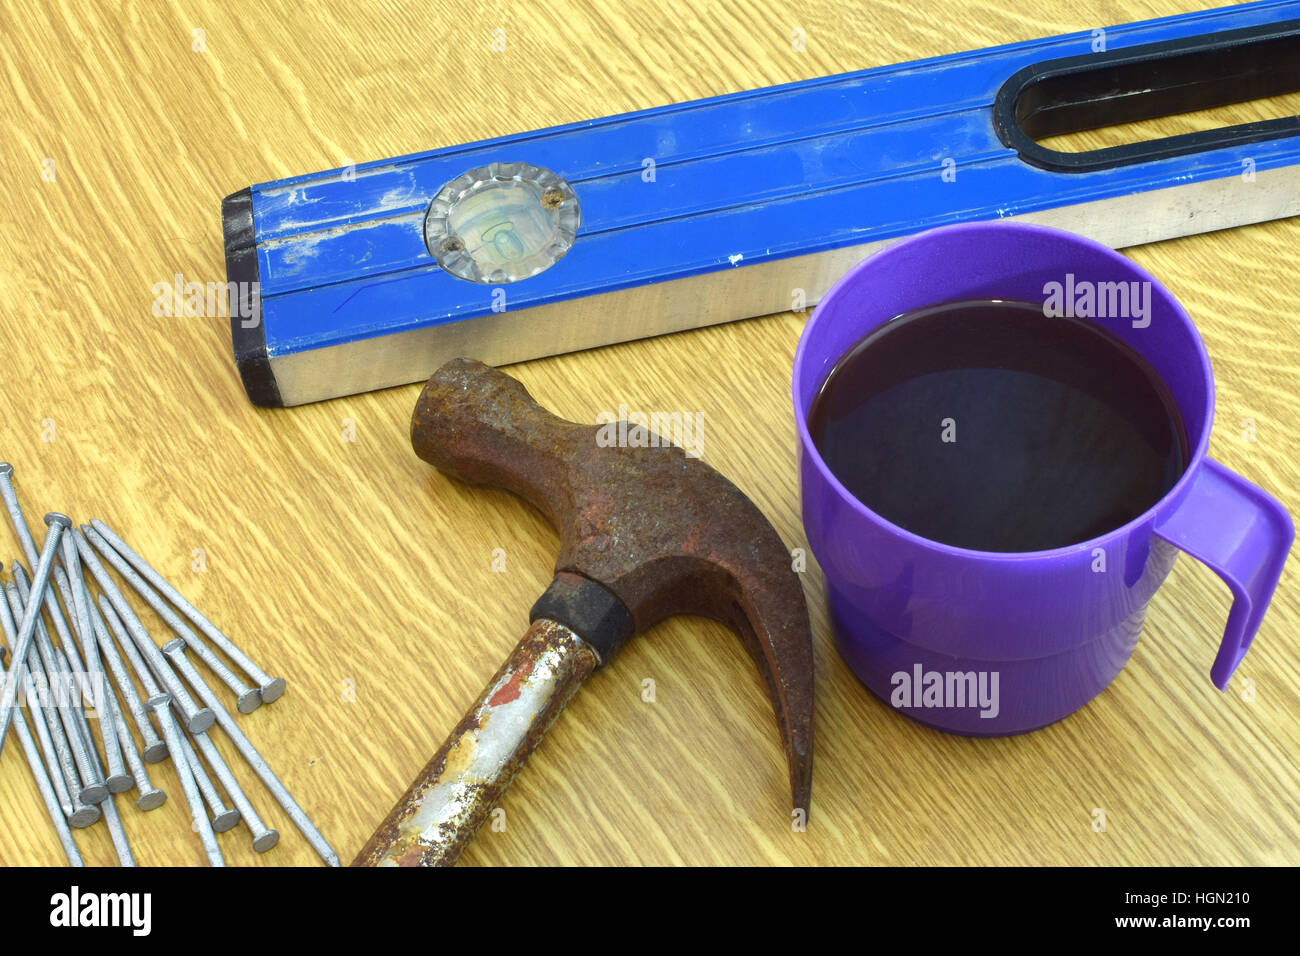 Coffee mug, old hammer, nails and spirit level on the table. Stock Photo